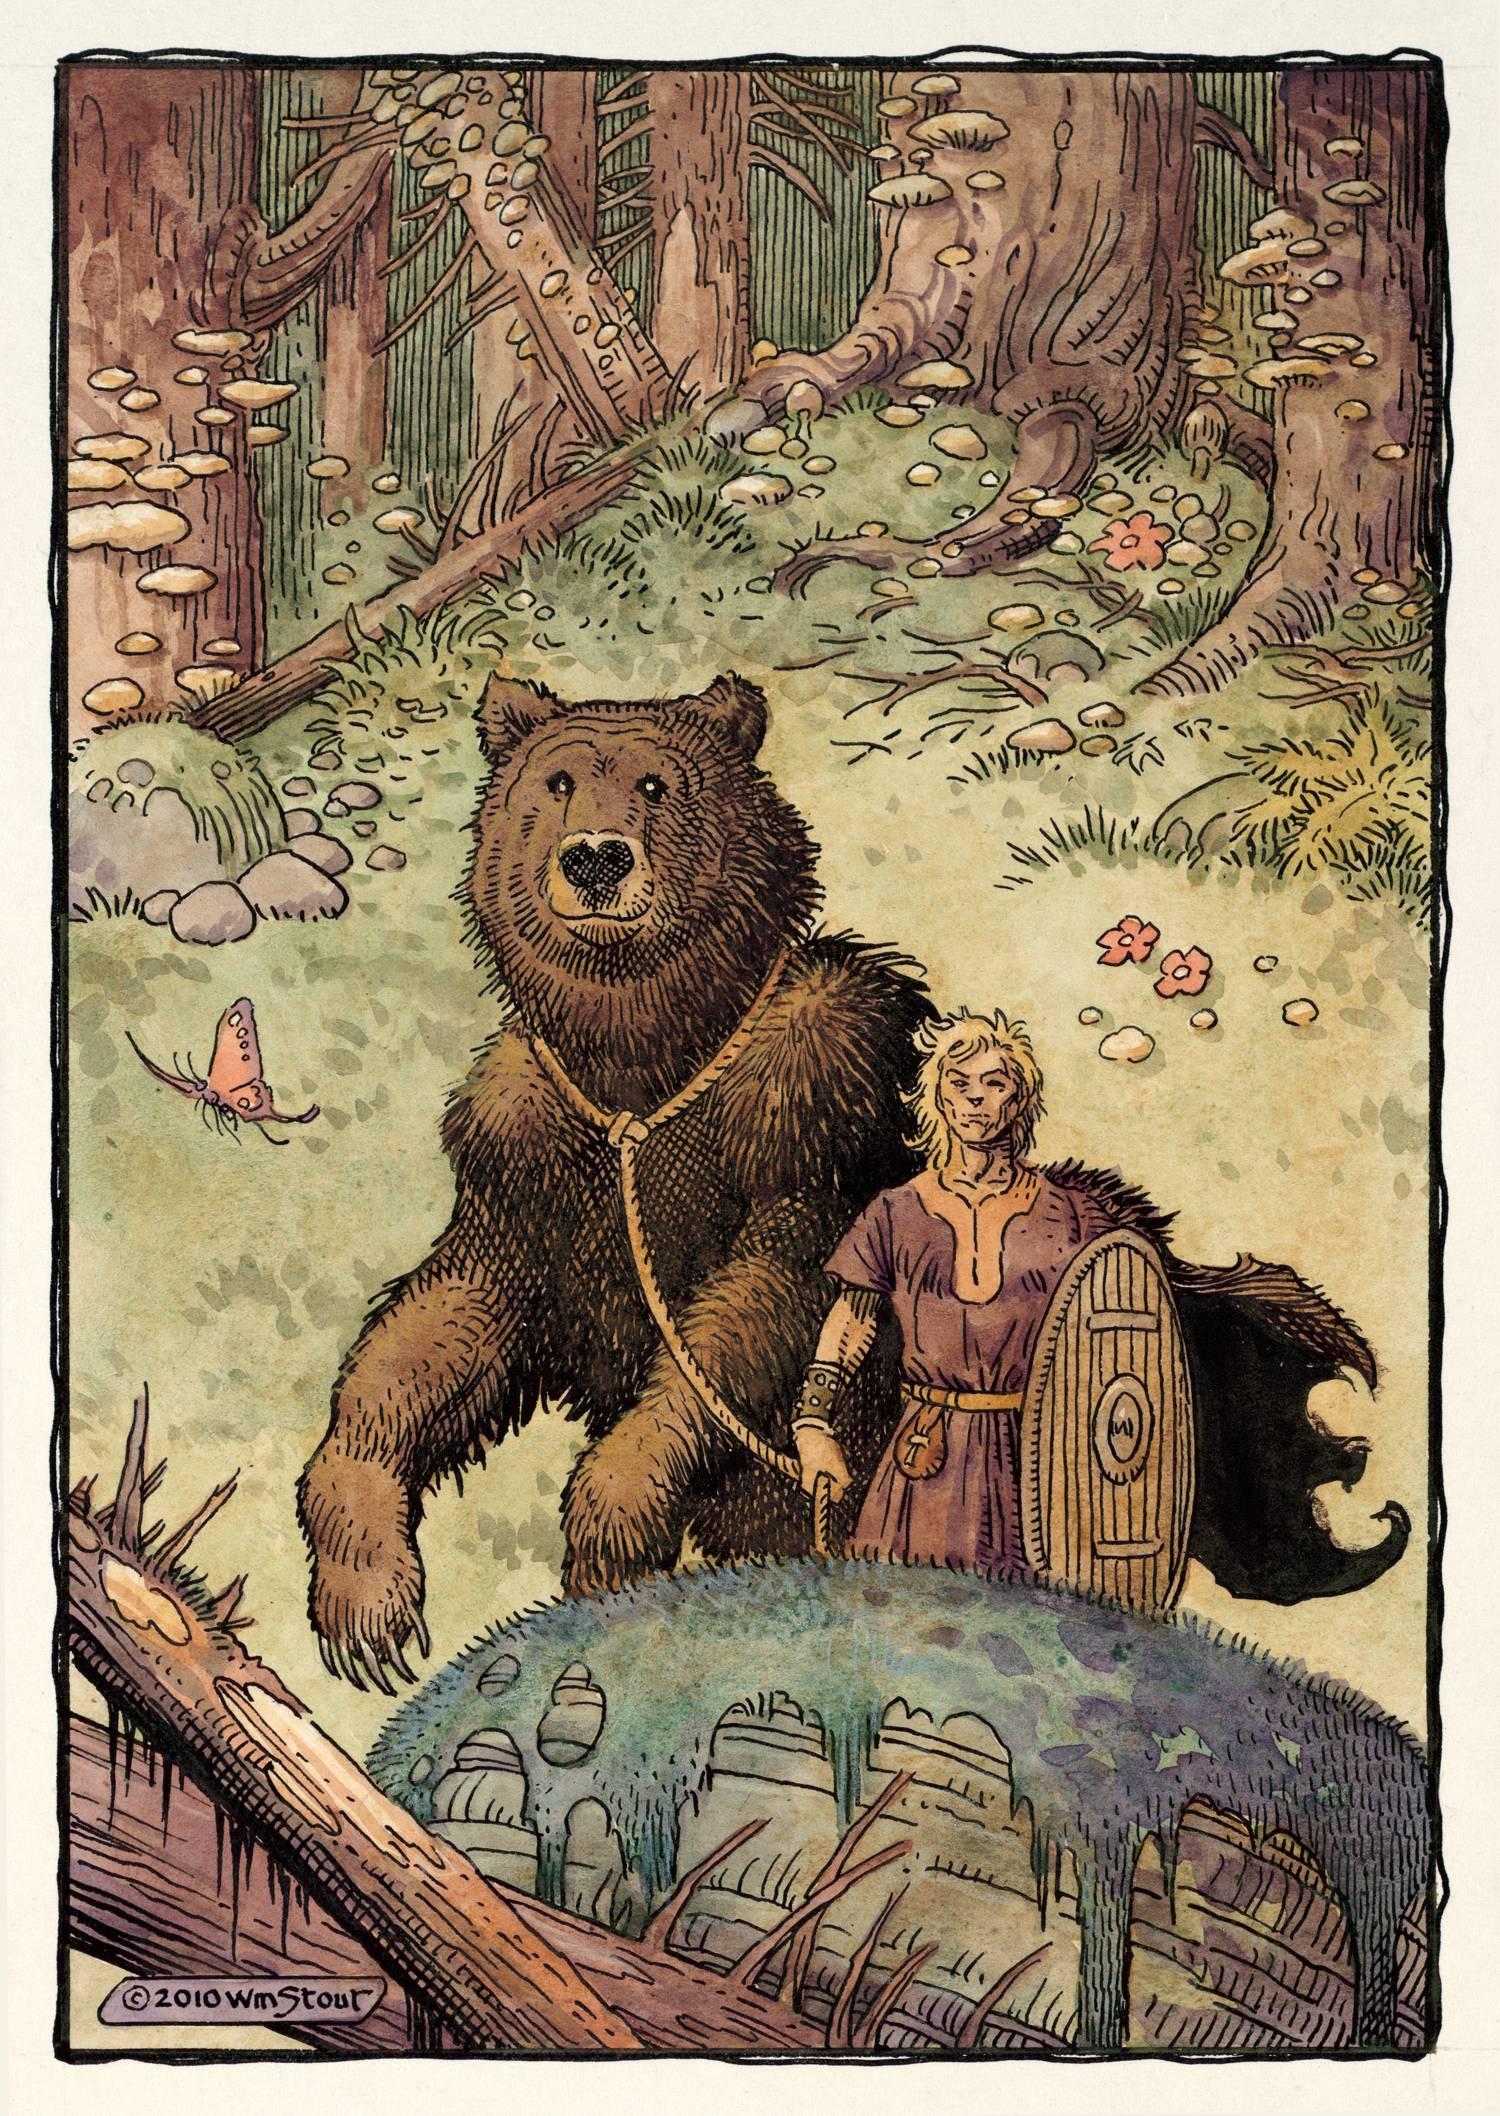 Siegfried and the Bear - Art by William Stout